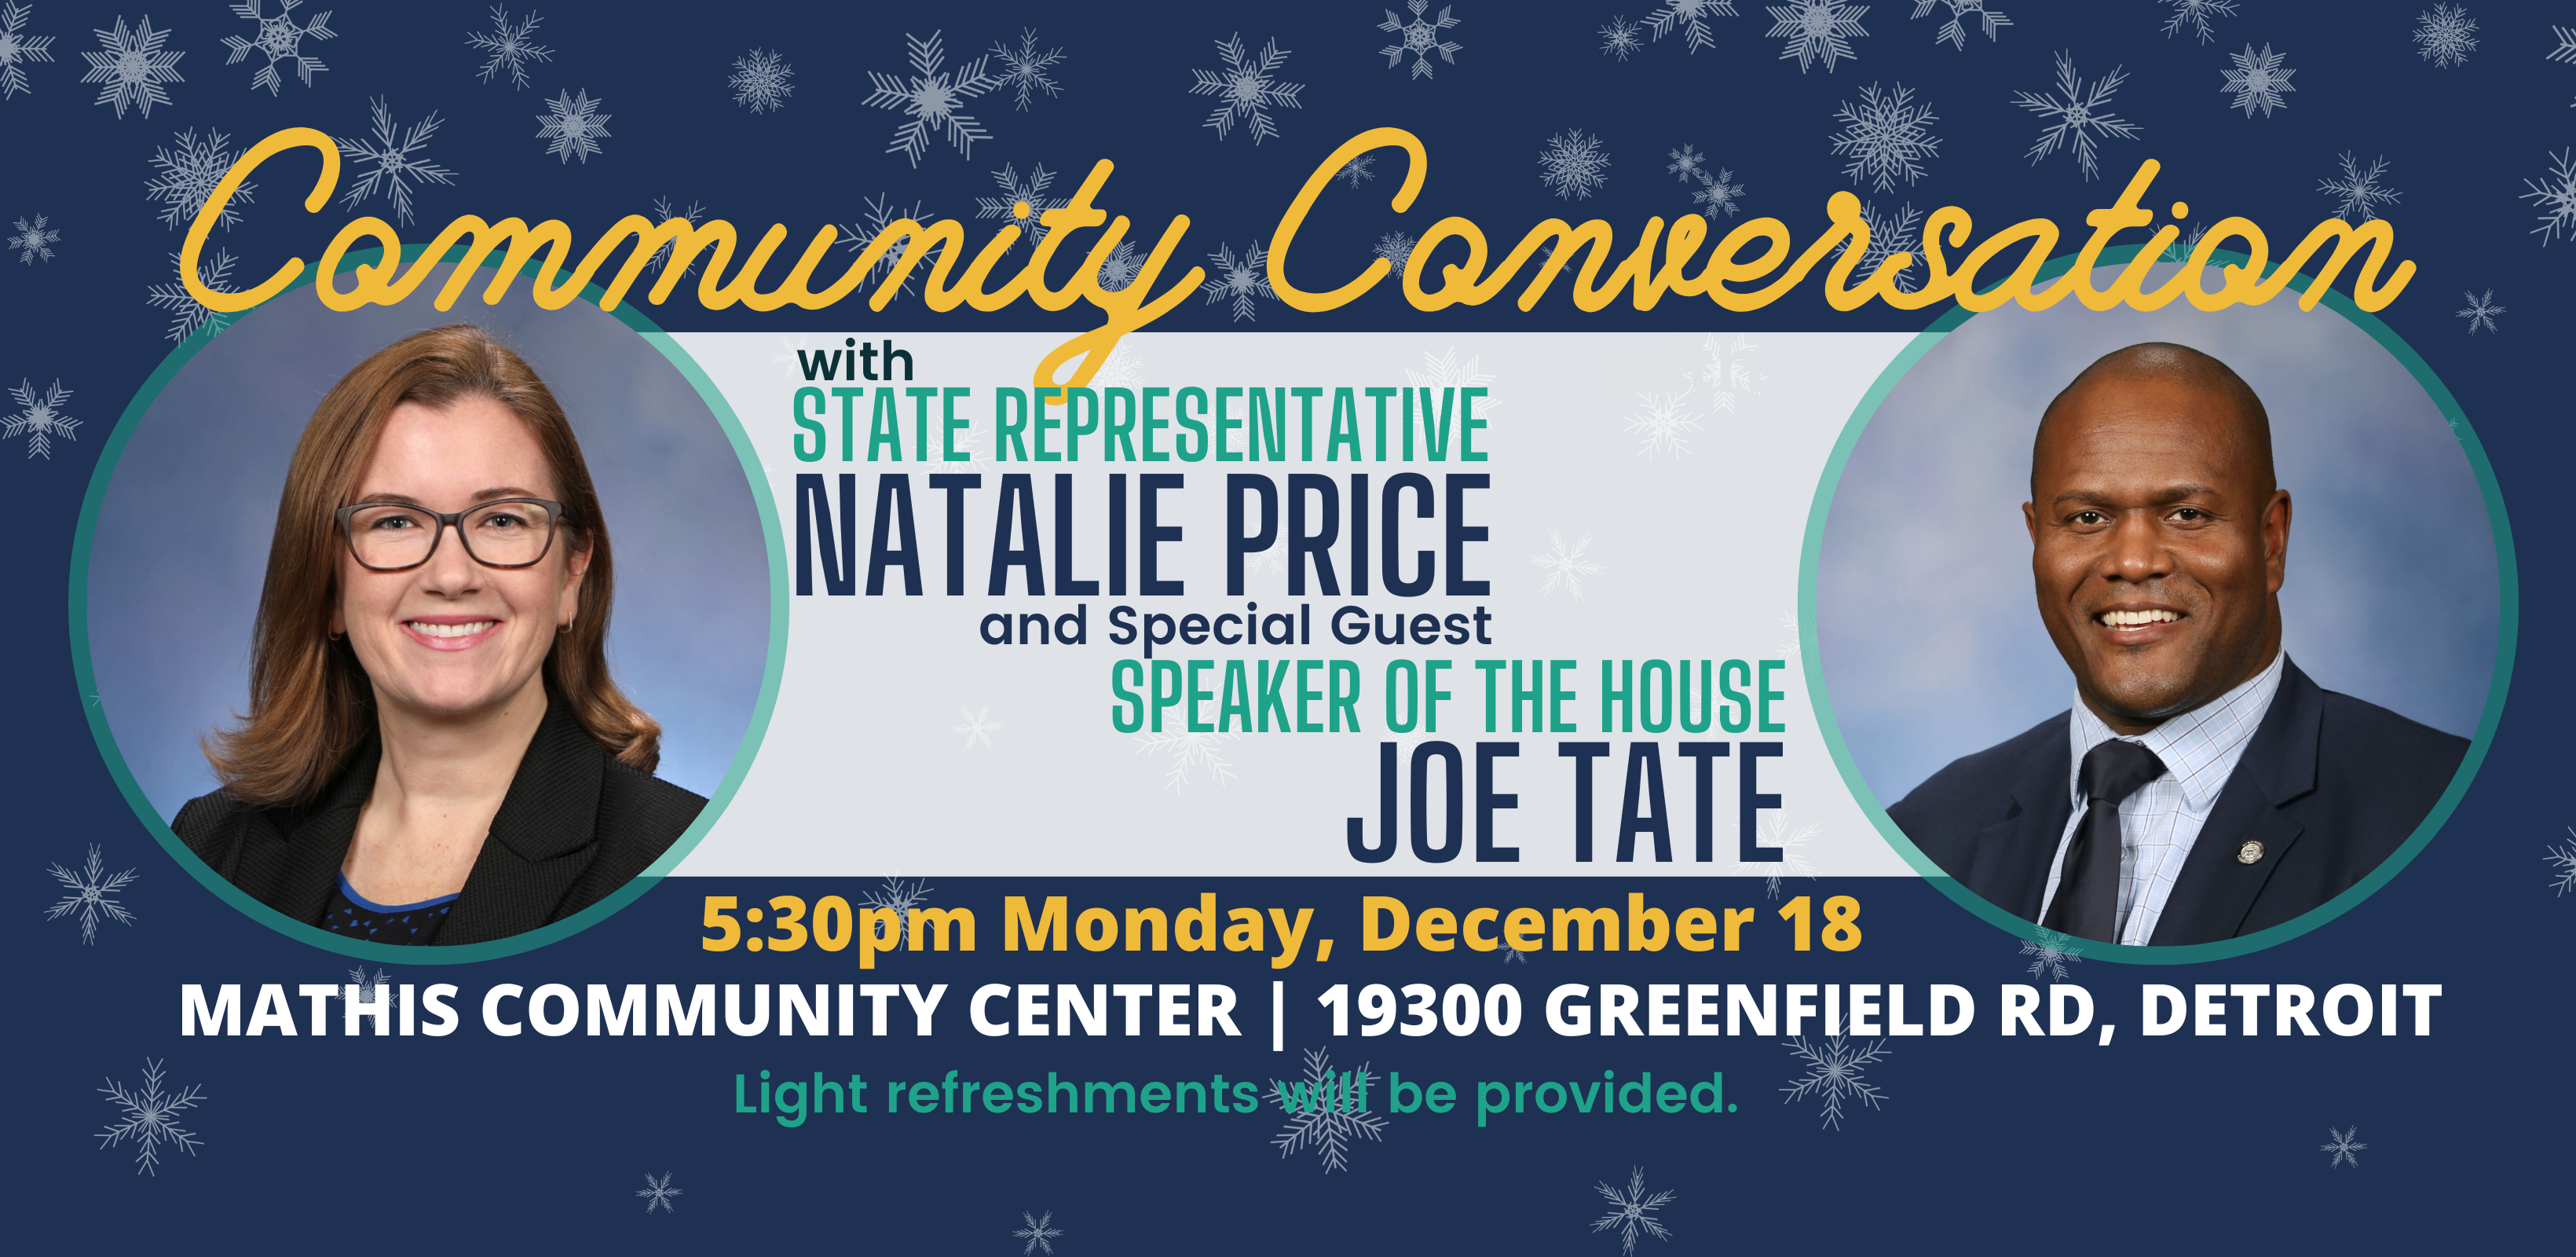 Infographic about the December 18 community conversation with Rep. Price and Speaker Tate that will take place at the Mathis Community Center in Detroit at 5:30pm. Light refreshments will be provided.